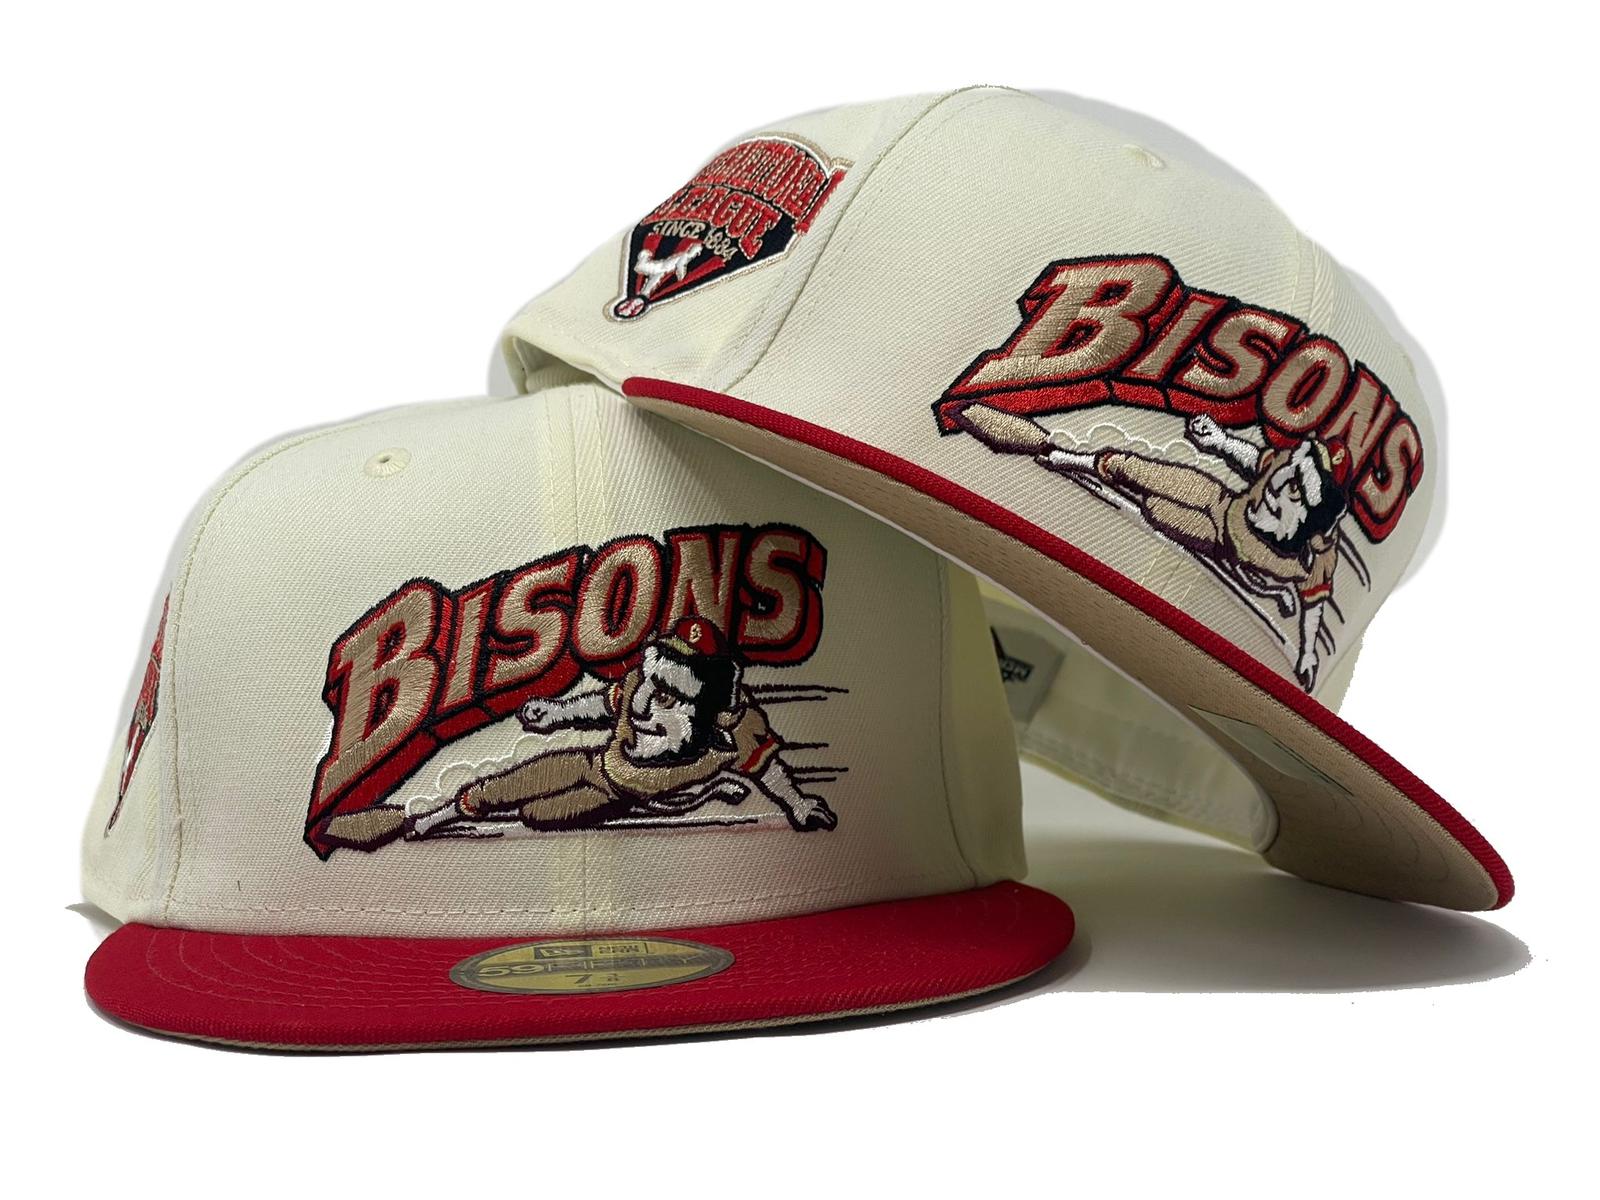 BUFFALO BISONS FITTED HAT SIZE 7 1/4 MILB club 5950 Pink Brown Gray New Era  cap